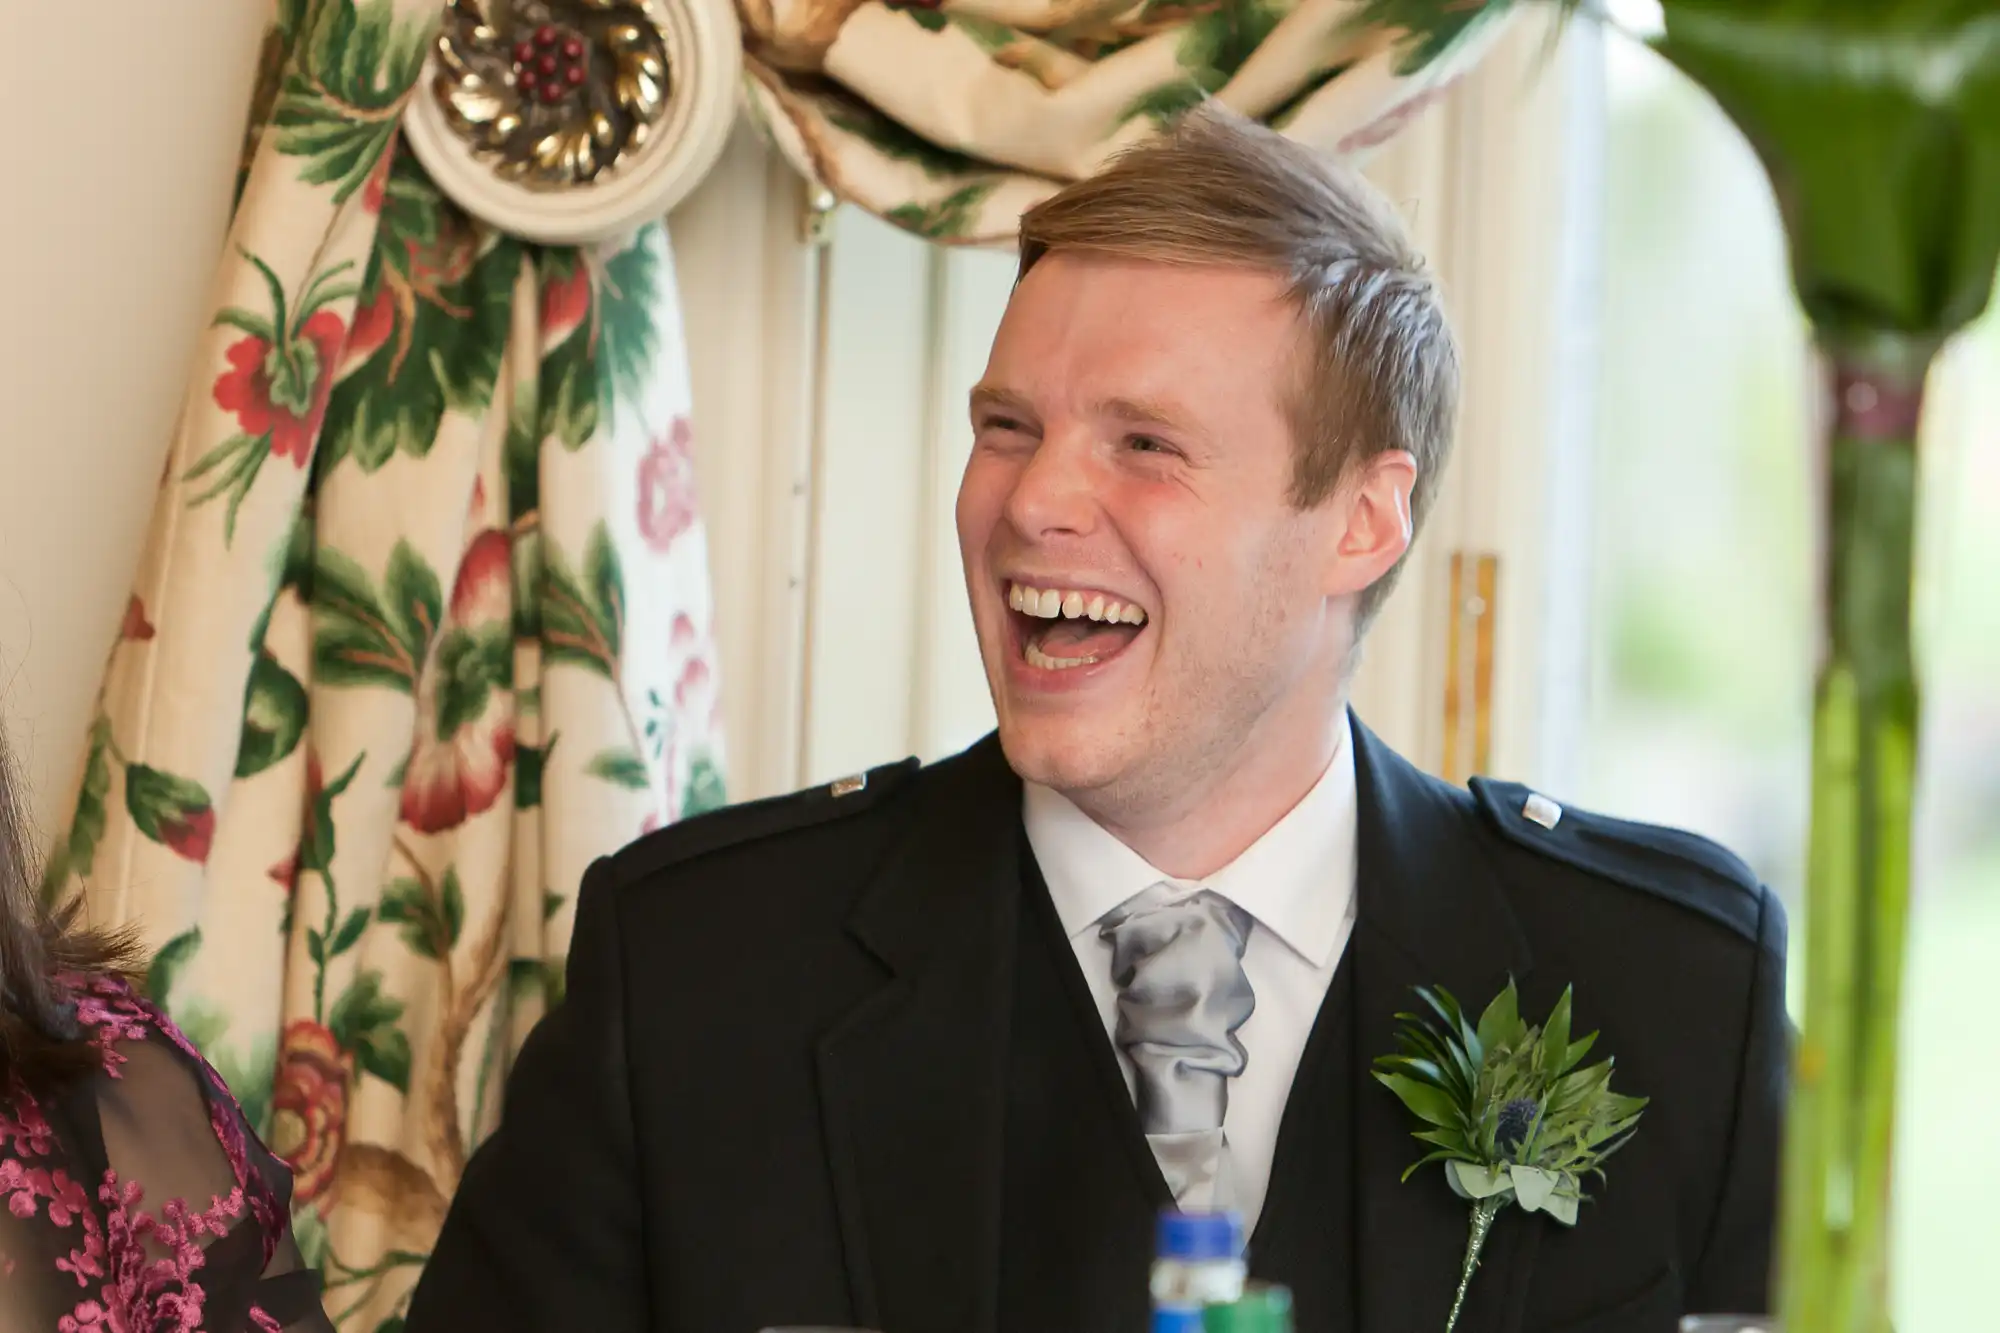 A man in a formal suit and tie laughing joyously at a table decorated with a floral curtain backdrop.